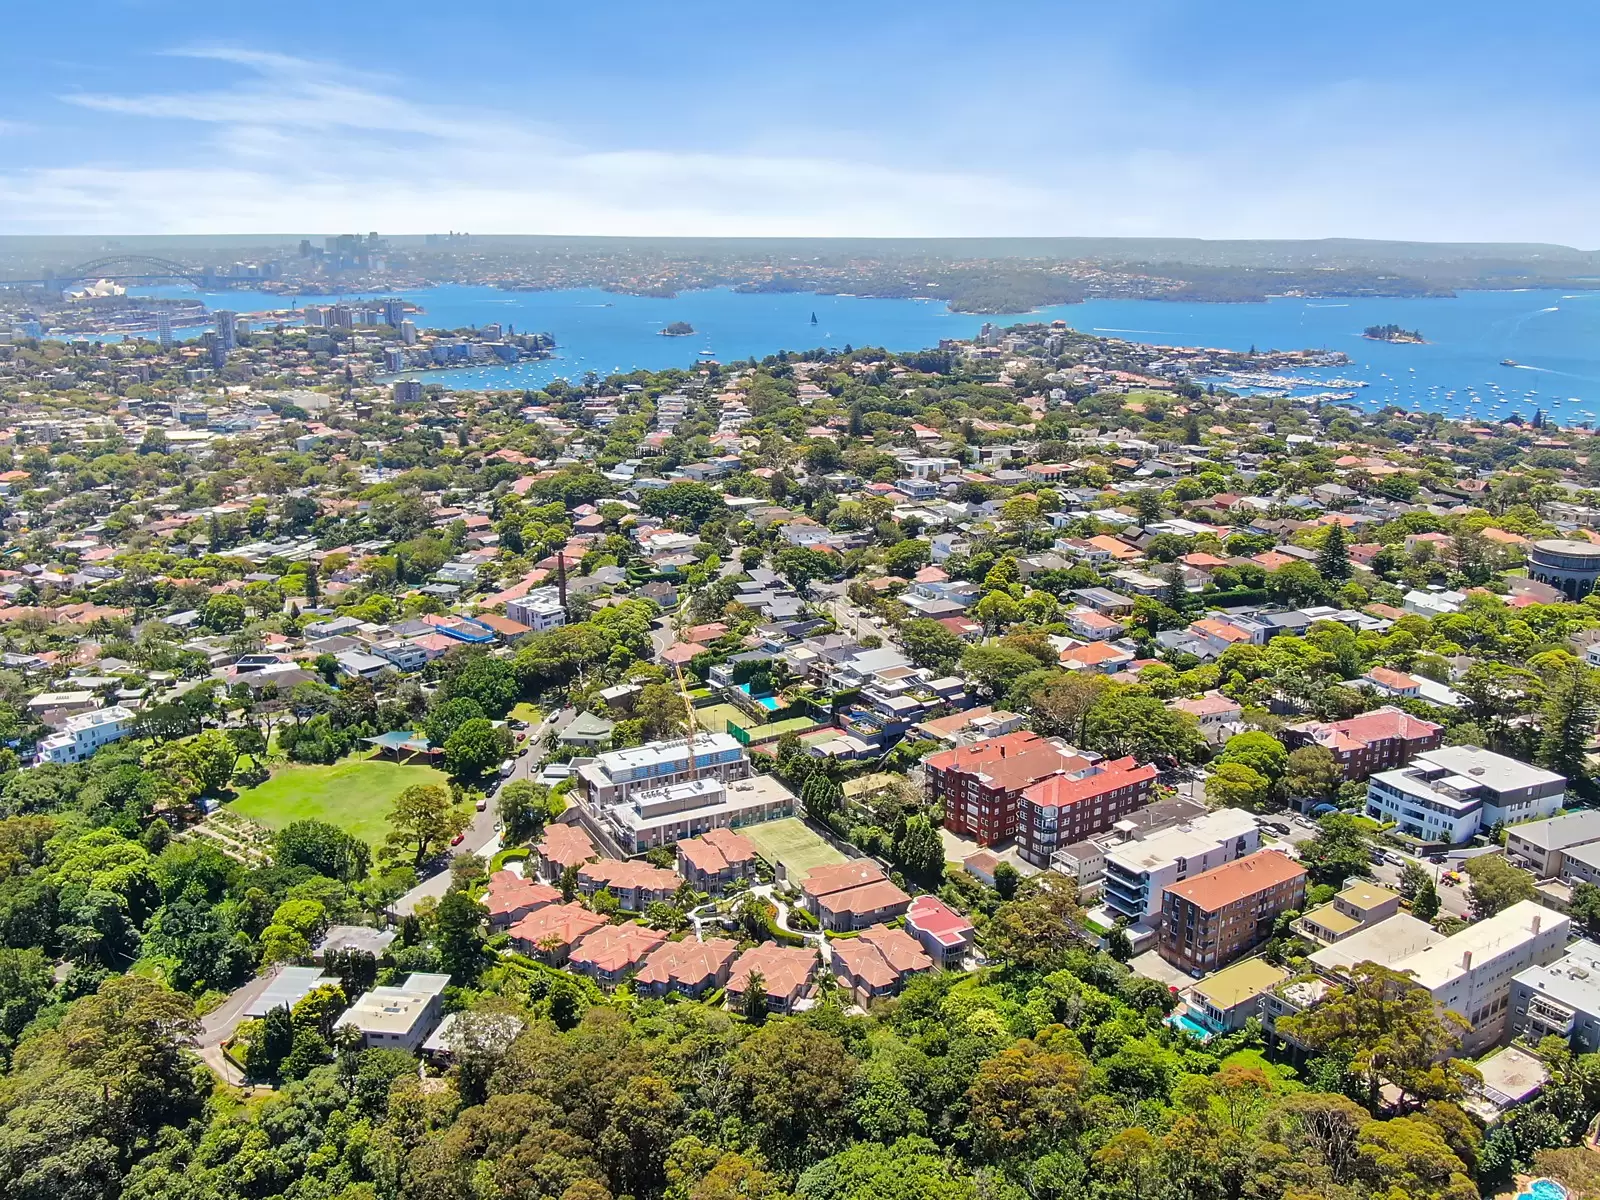 Photo #19: 22/17a Cooper Park Road, Bellevue Hill - Sold by Sydney Sotheby's International Realty